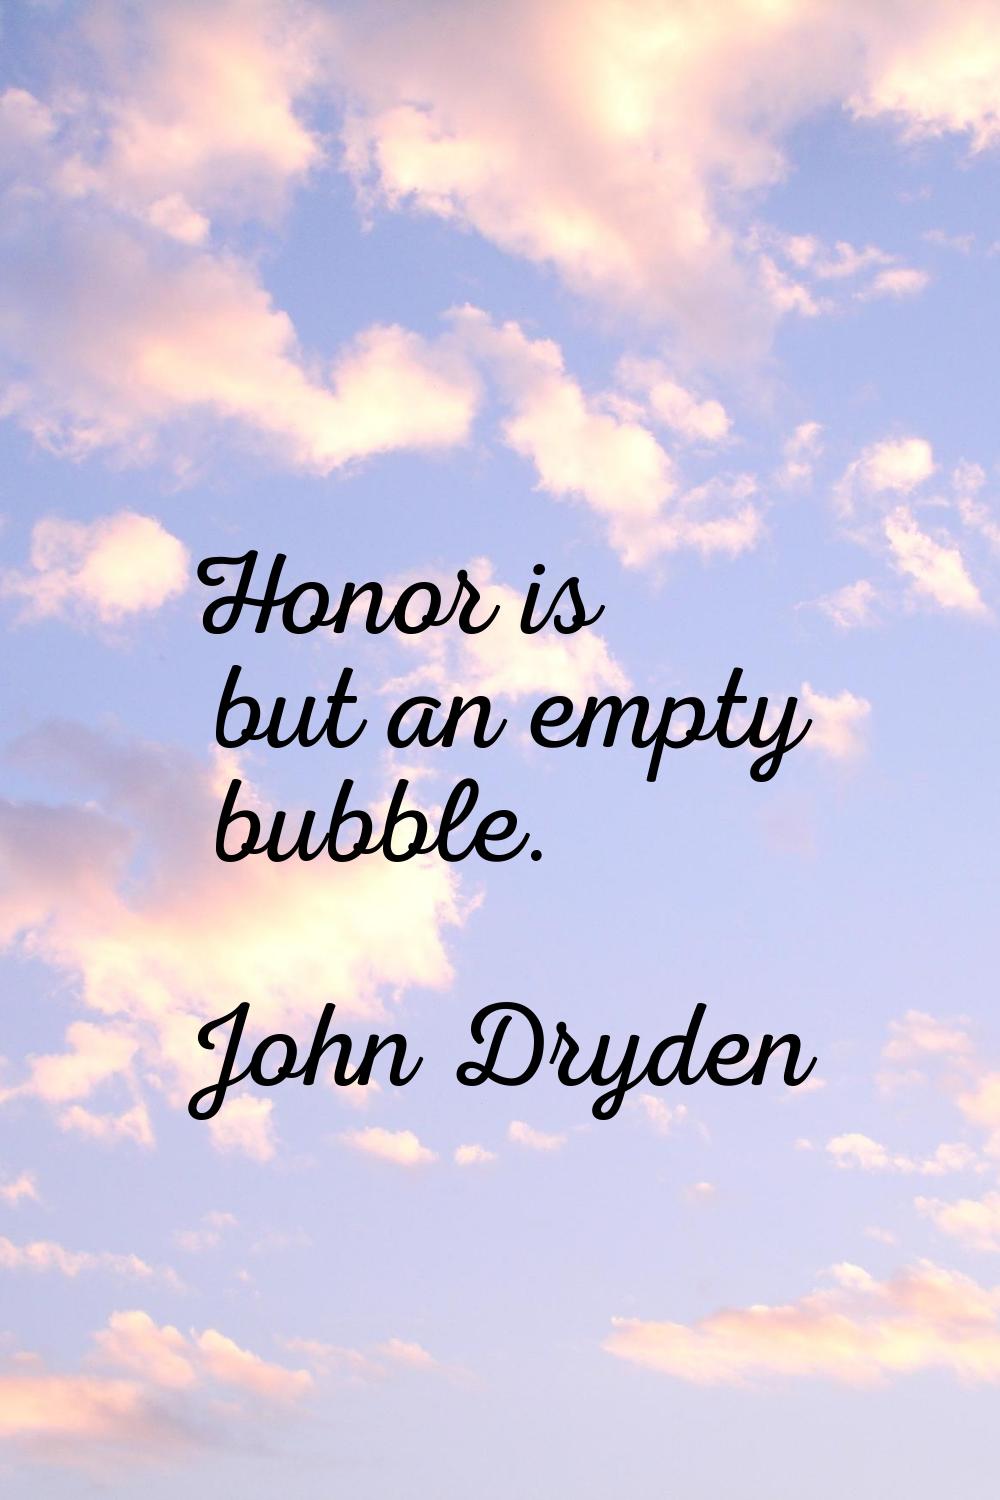 Honor is but an empty bubble.